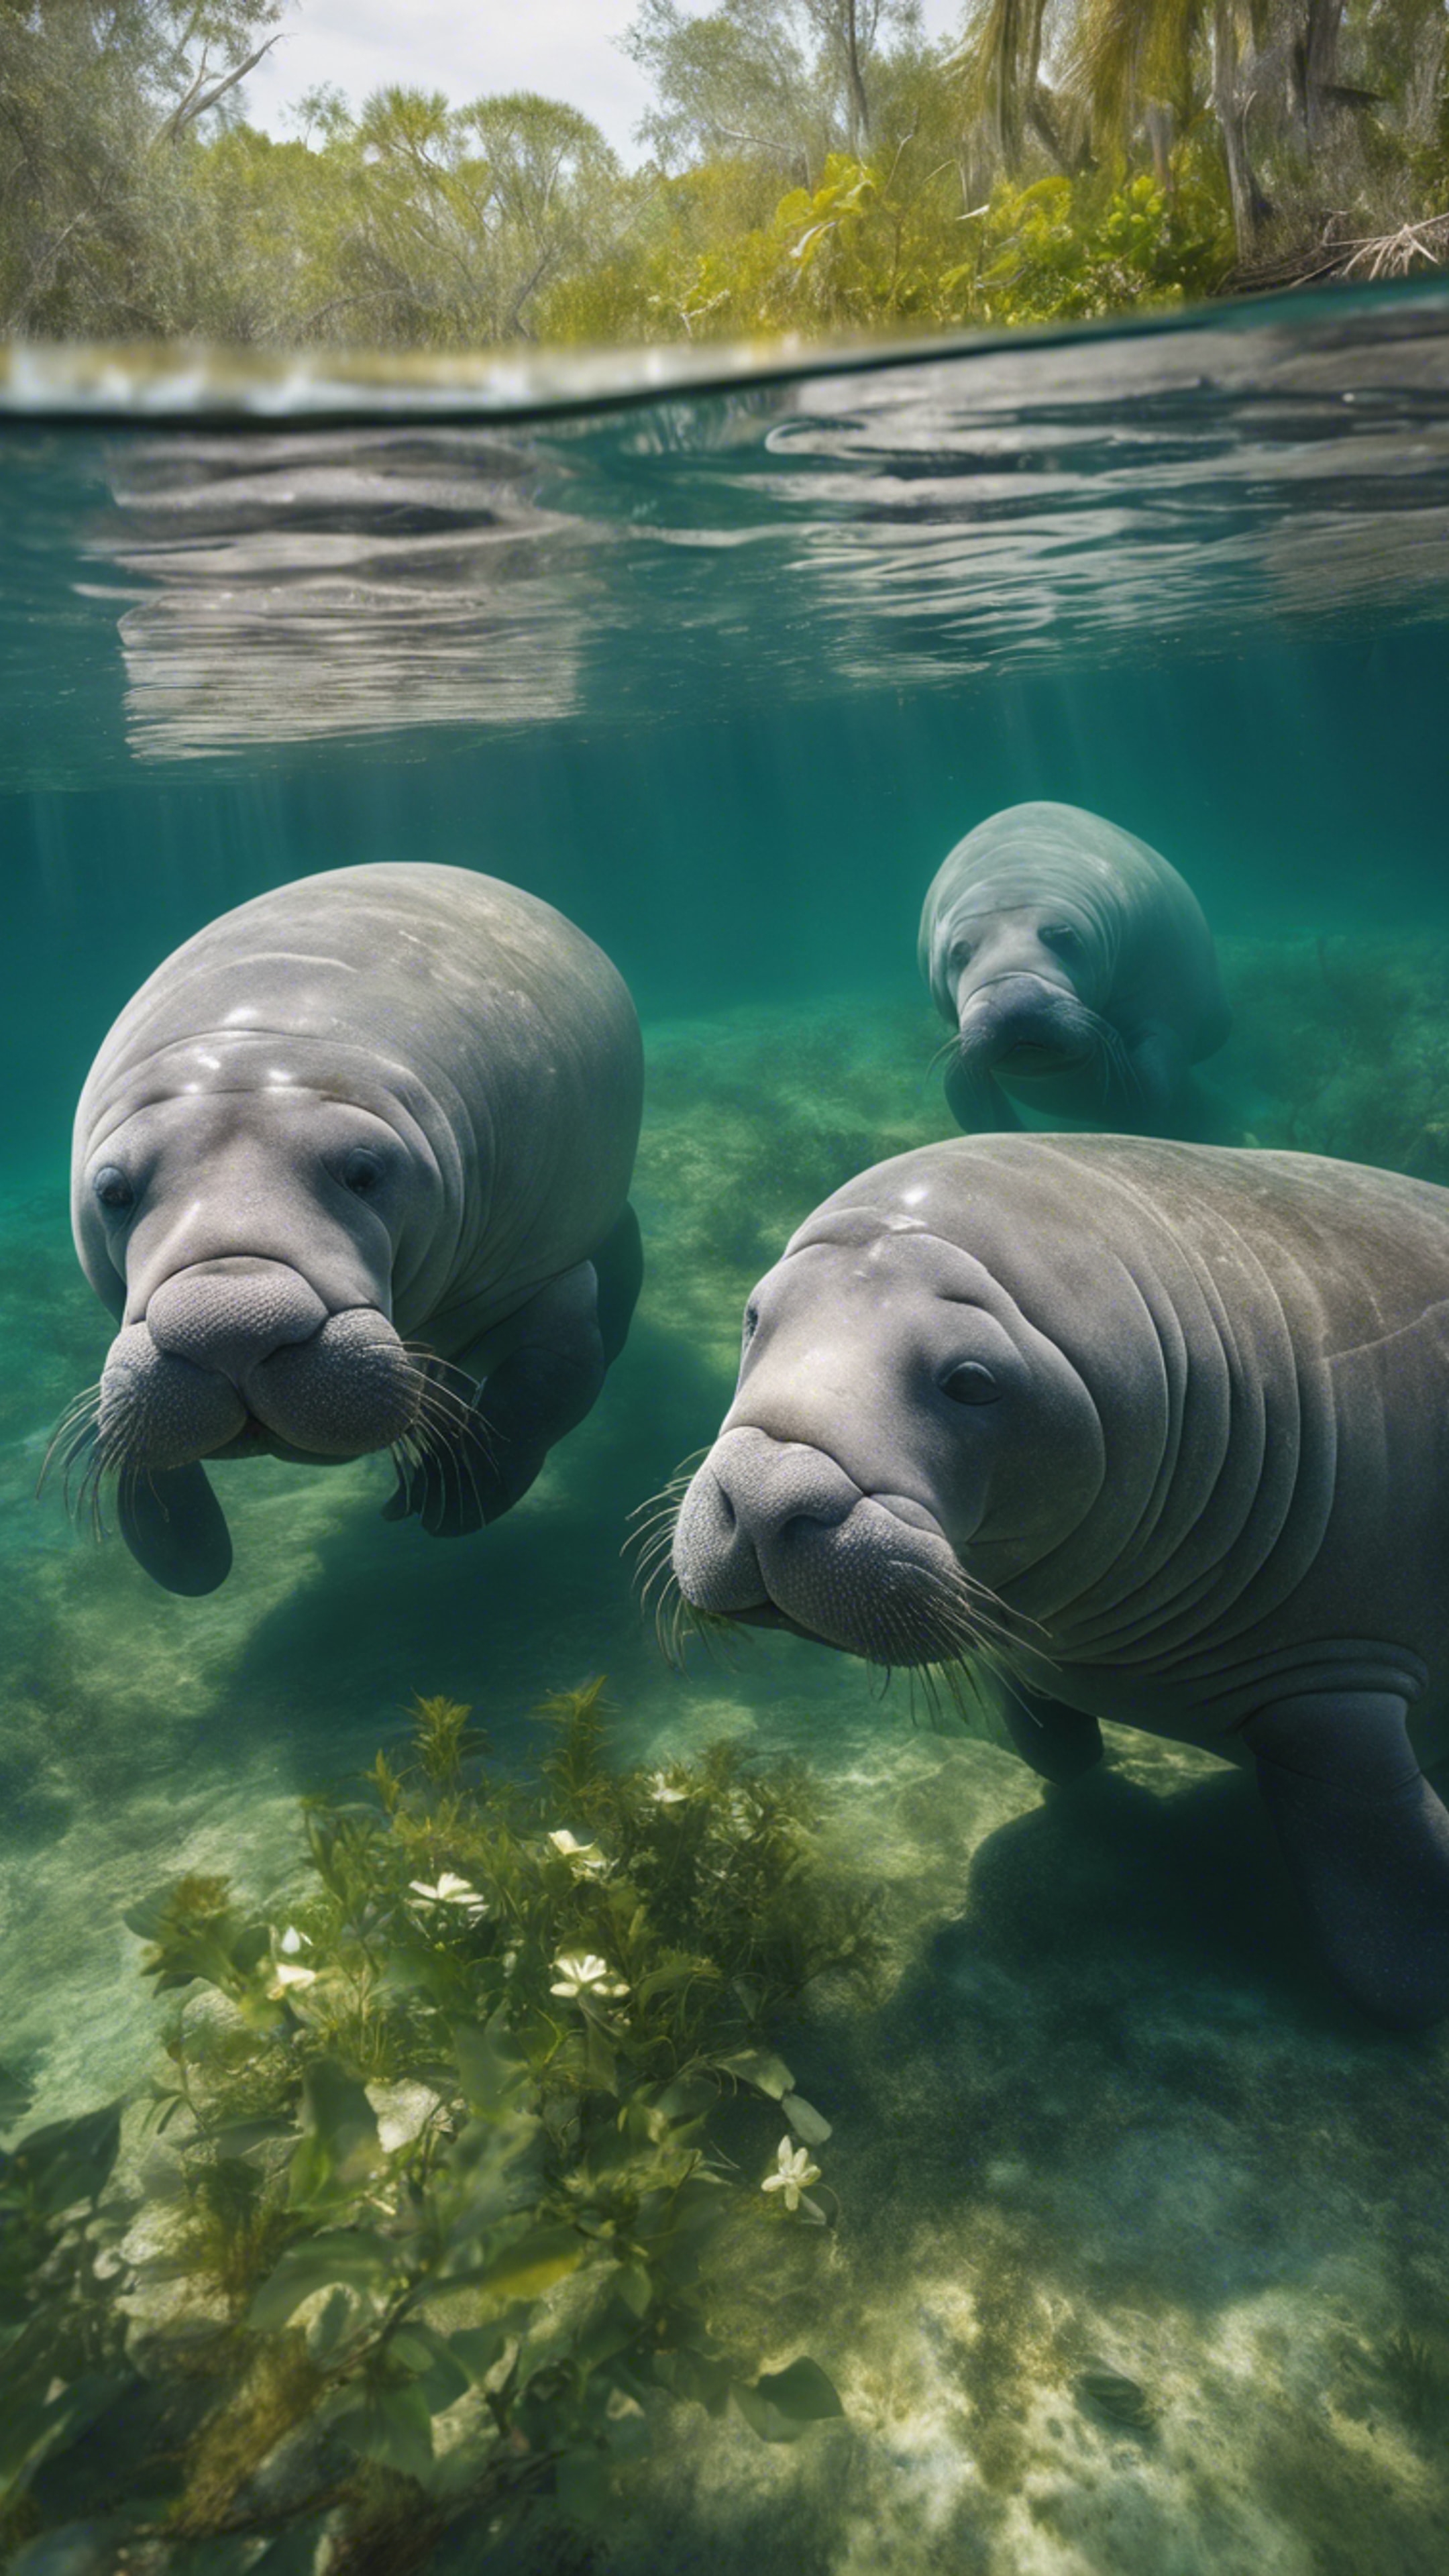 A group of manatees gathering in a crystal clear spring in Northern Florida, with light filtering through the water. 벽지[11e0c5c39072420c89d2]